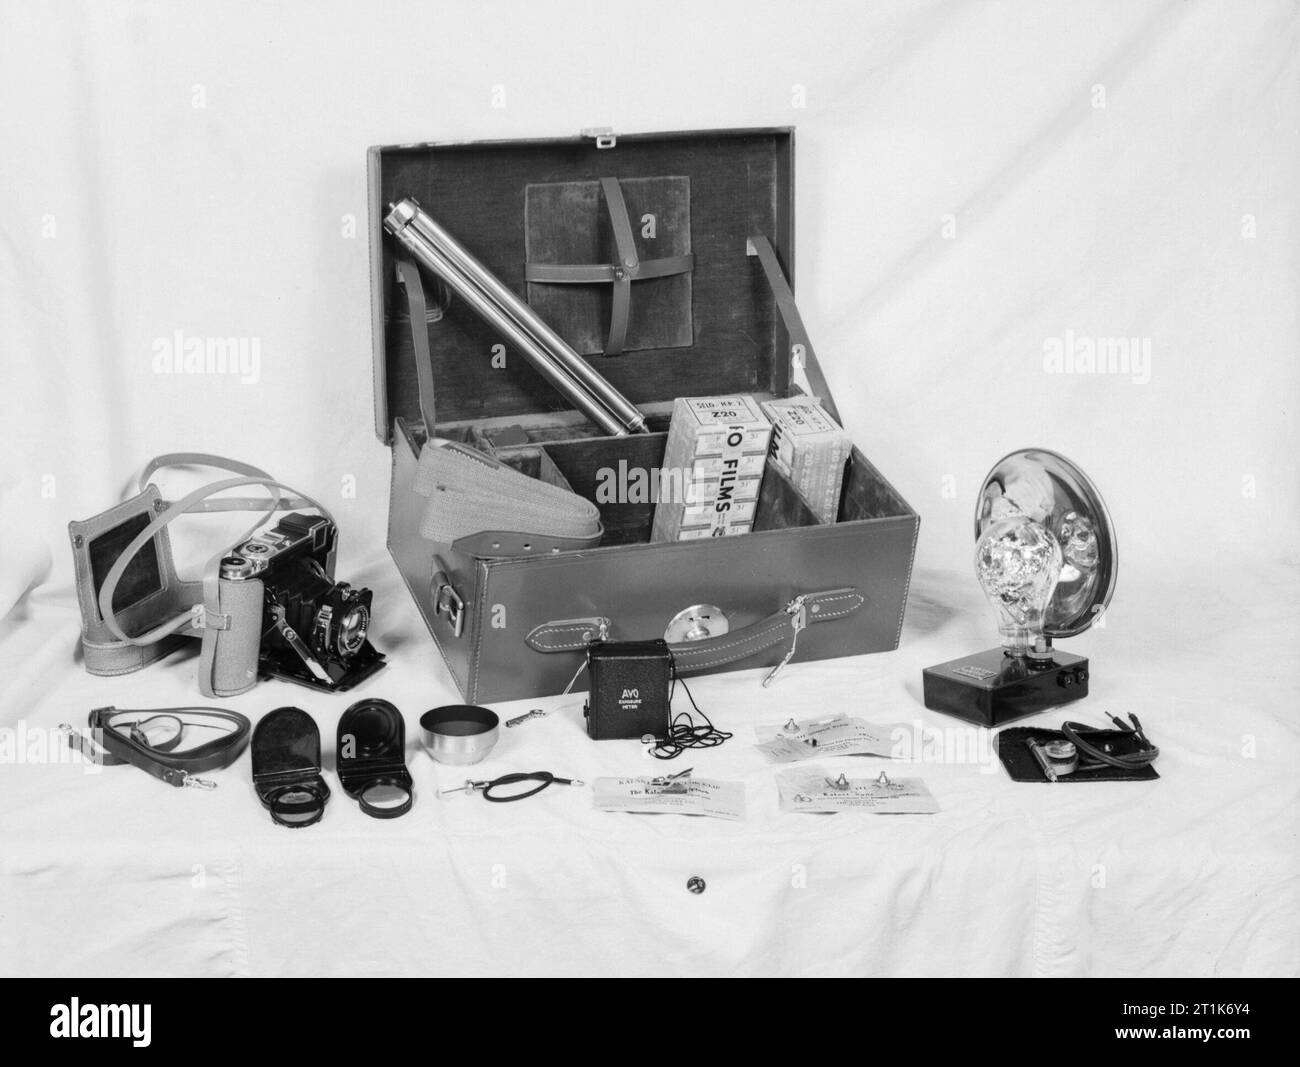 Super Ikonta camera, case and accessories as issued to official War Office photographers, July 1940. Super Ikonta camera, case and accessories issued to official War Office photographers during the Second World War. Stock Photo